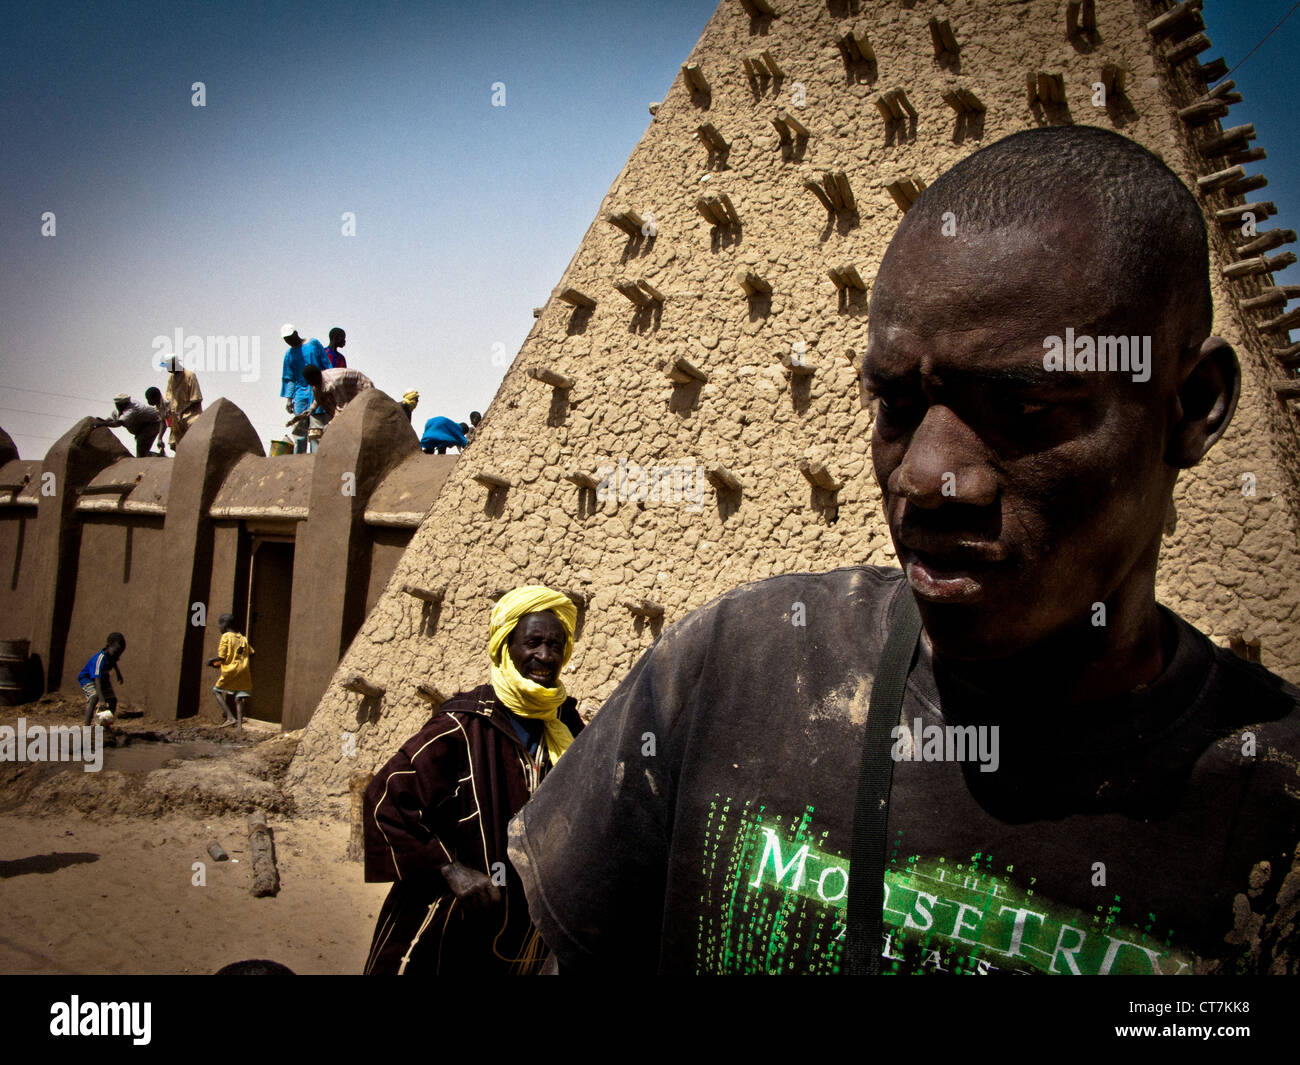 Crepissage festival. Restoration with fresh mud of the Sankore mosque.Timbuktu. mali Stock Photo